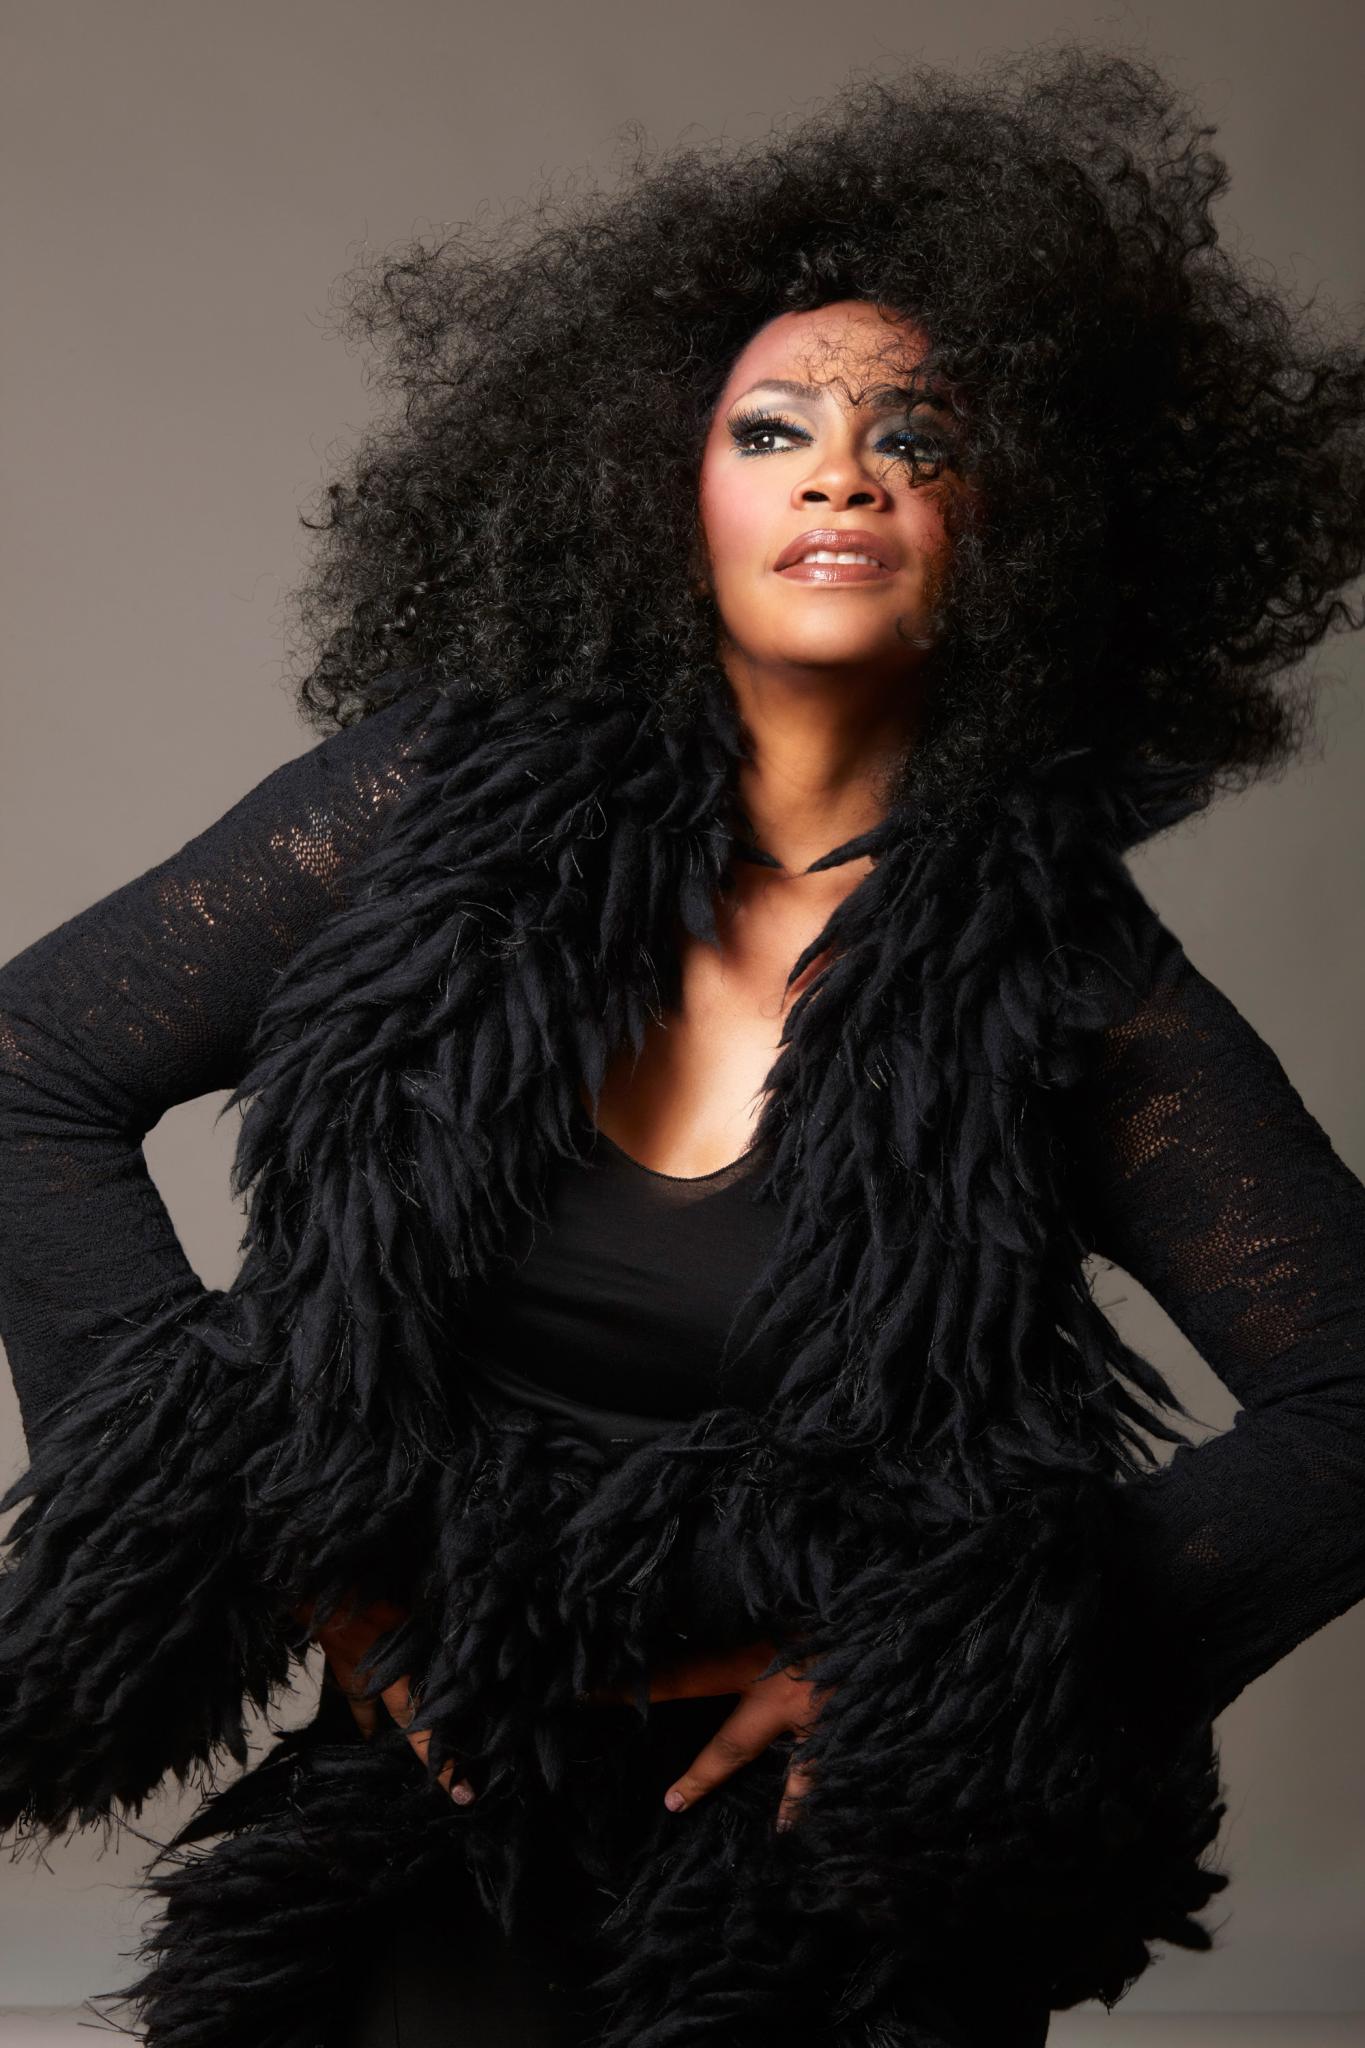 Jody Watley Claps Back at Trolls and Haters
